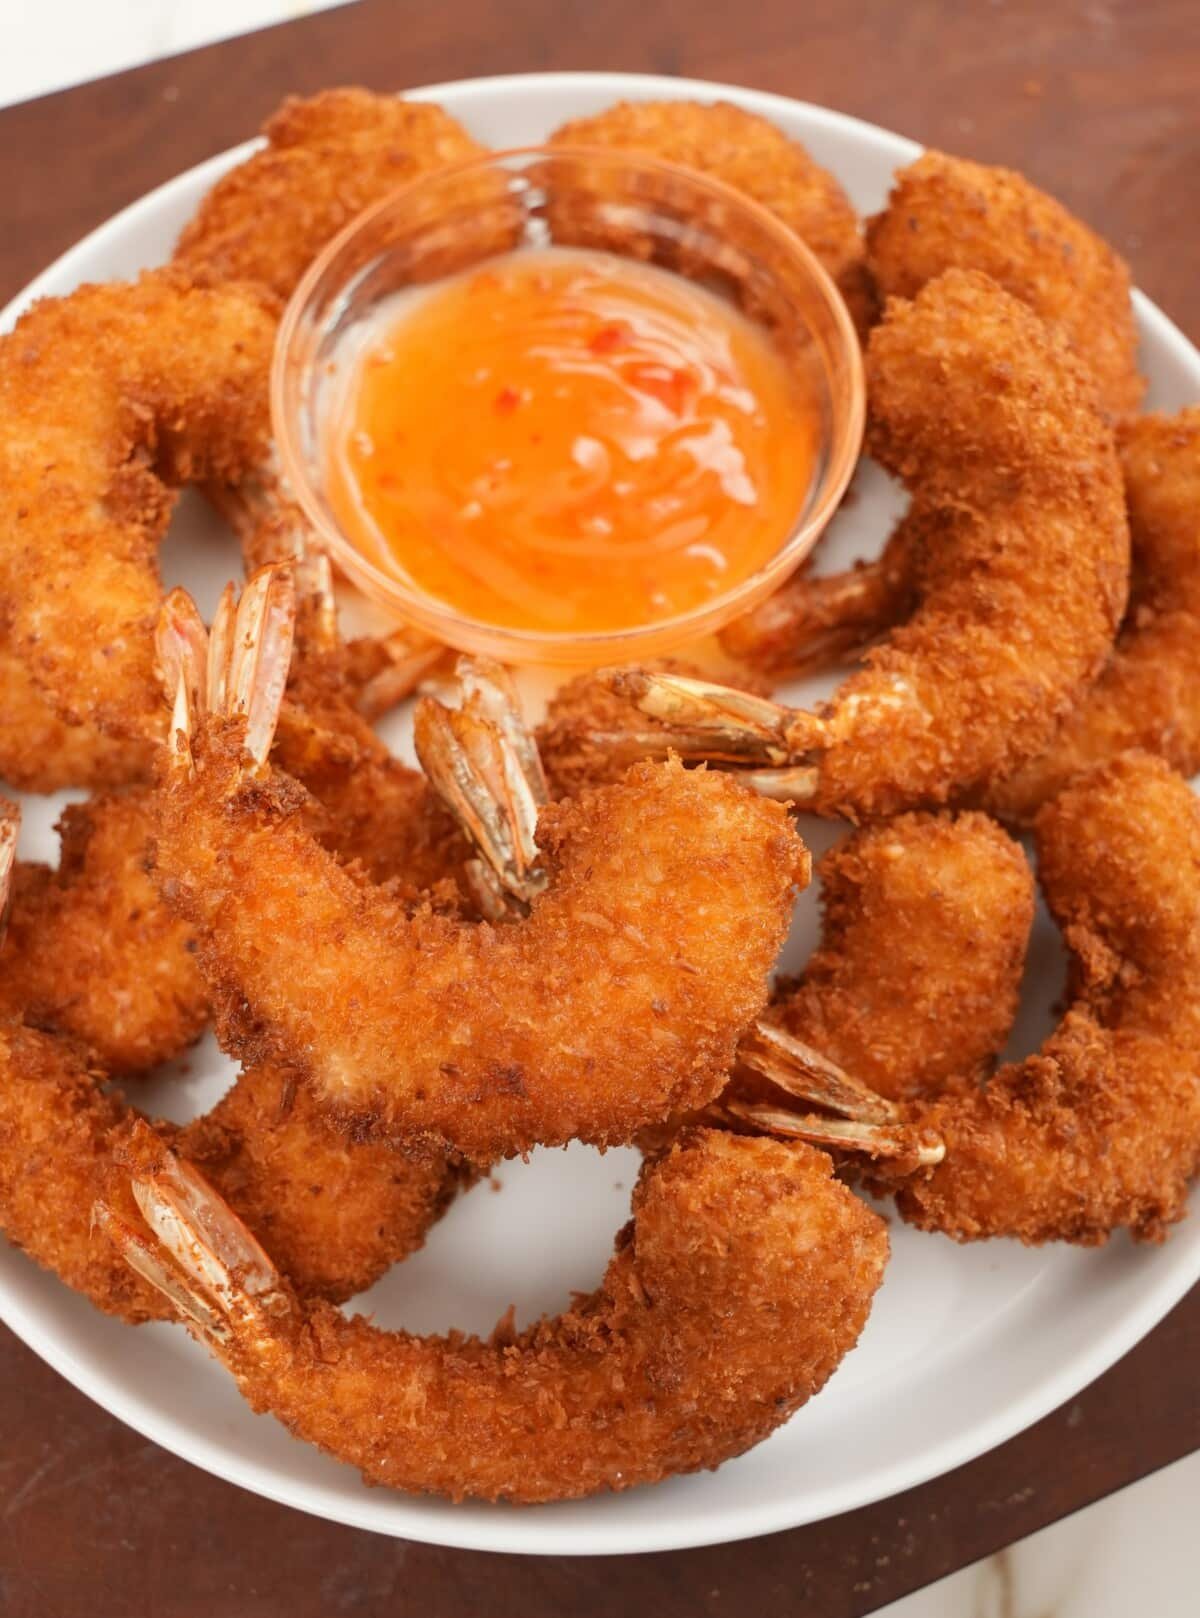 Fried coconut shrimp with sweet chili sauce on a plate.